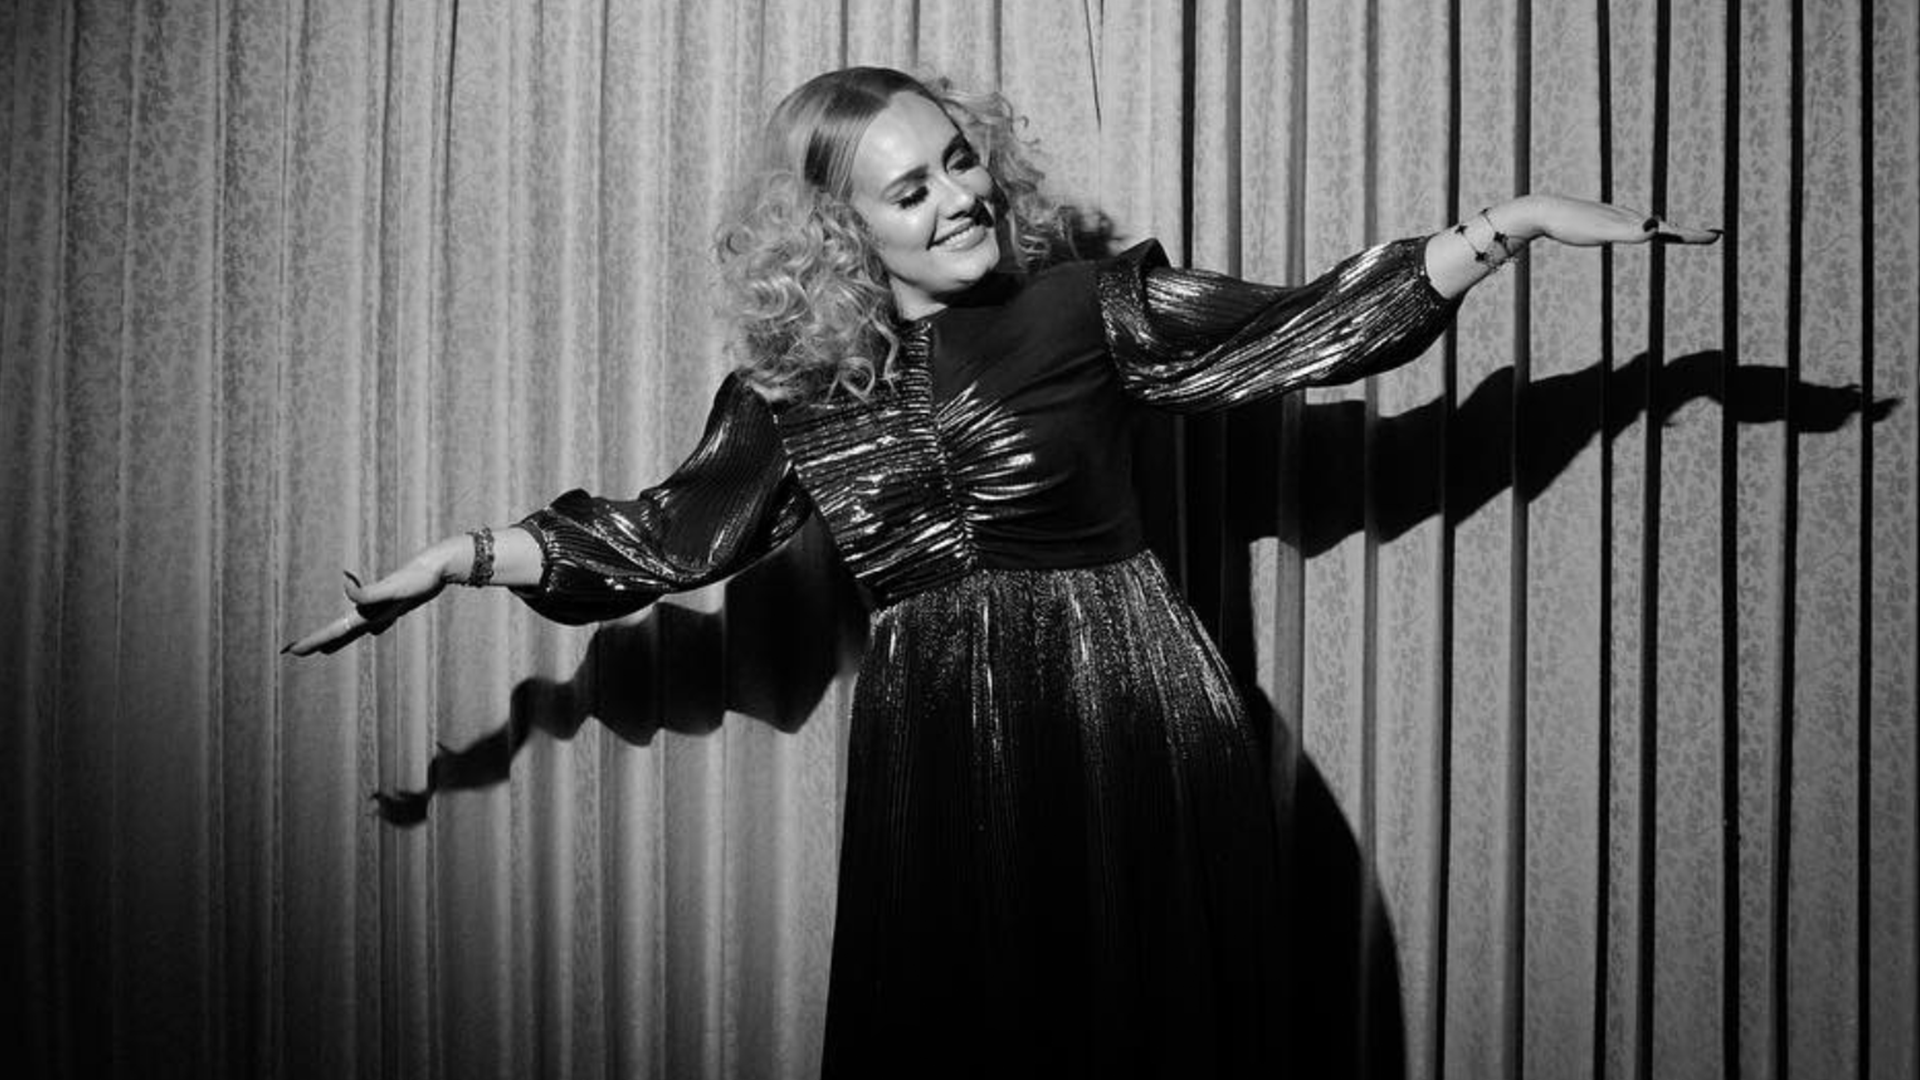 Adele in black and white in front of a stage curtain